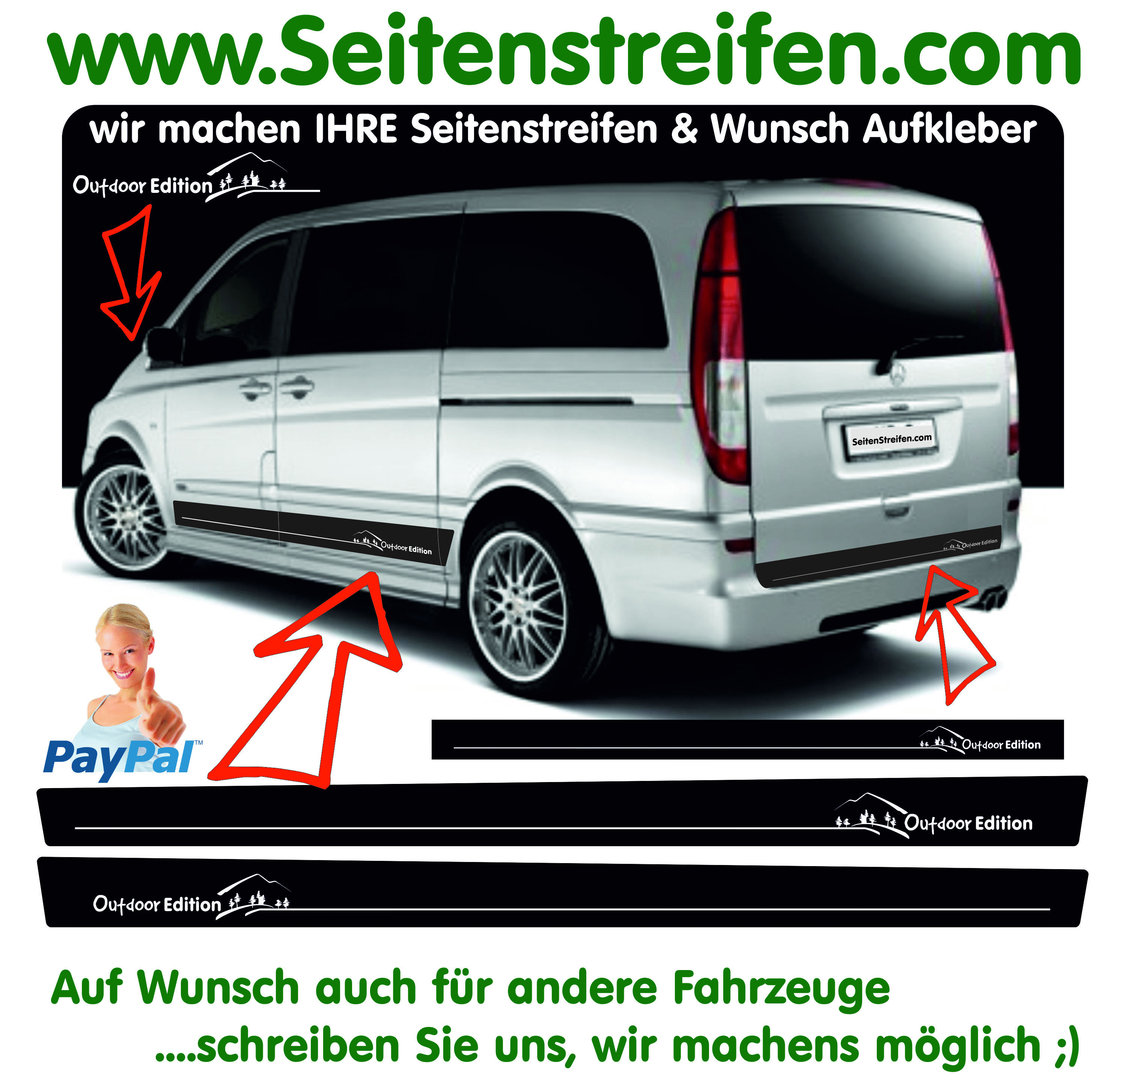 Mercedes Benz Vito & Viano - Outdoor Edition - Side Stripes Graphics Decals Sticker Kit - N° 7677